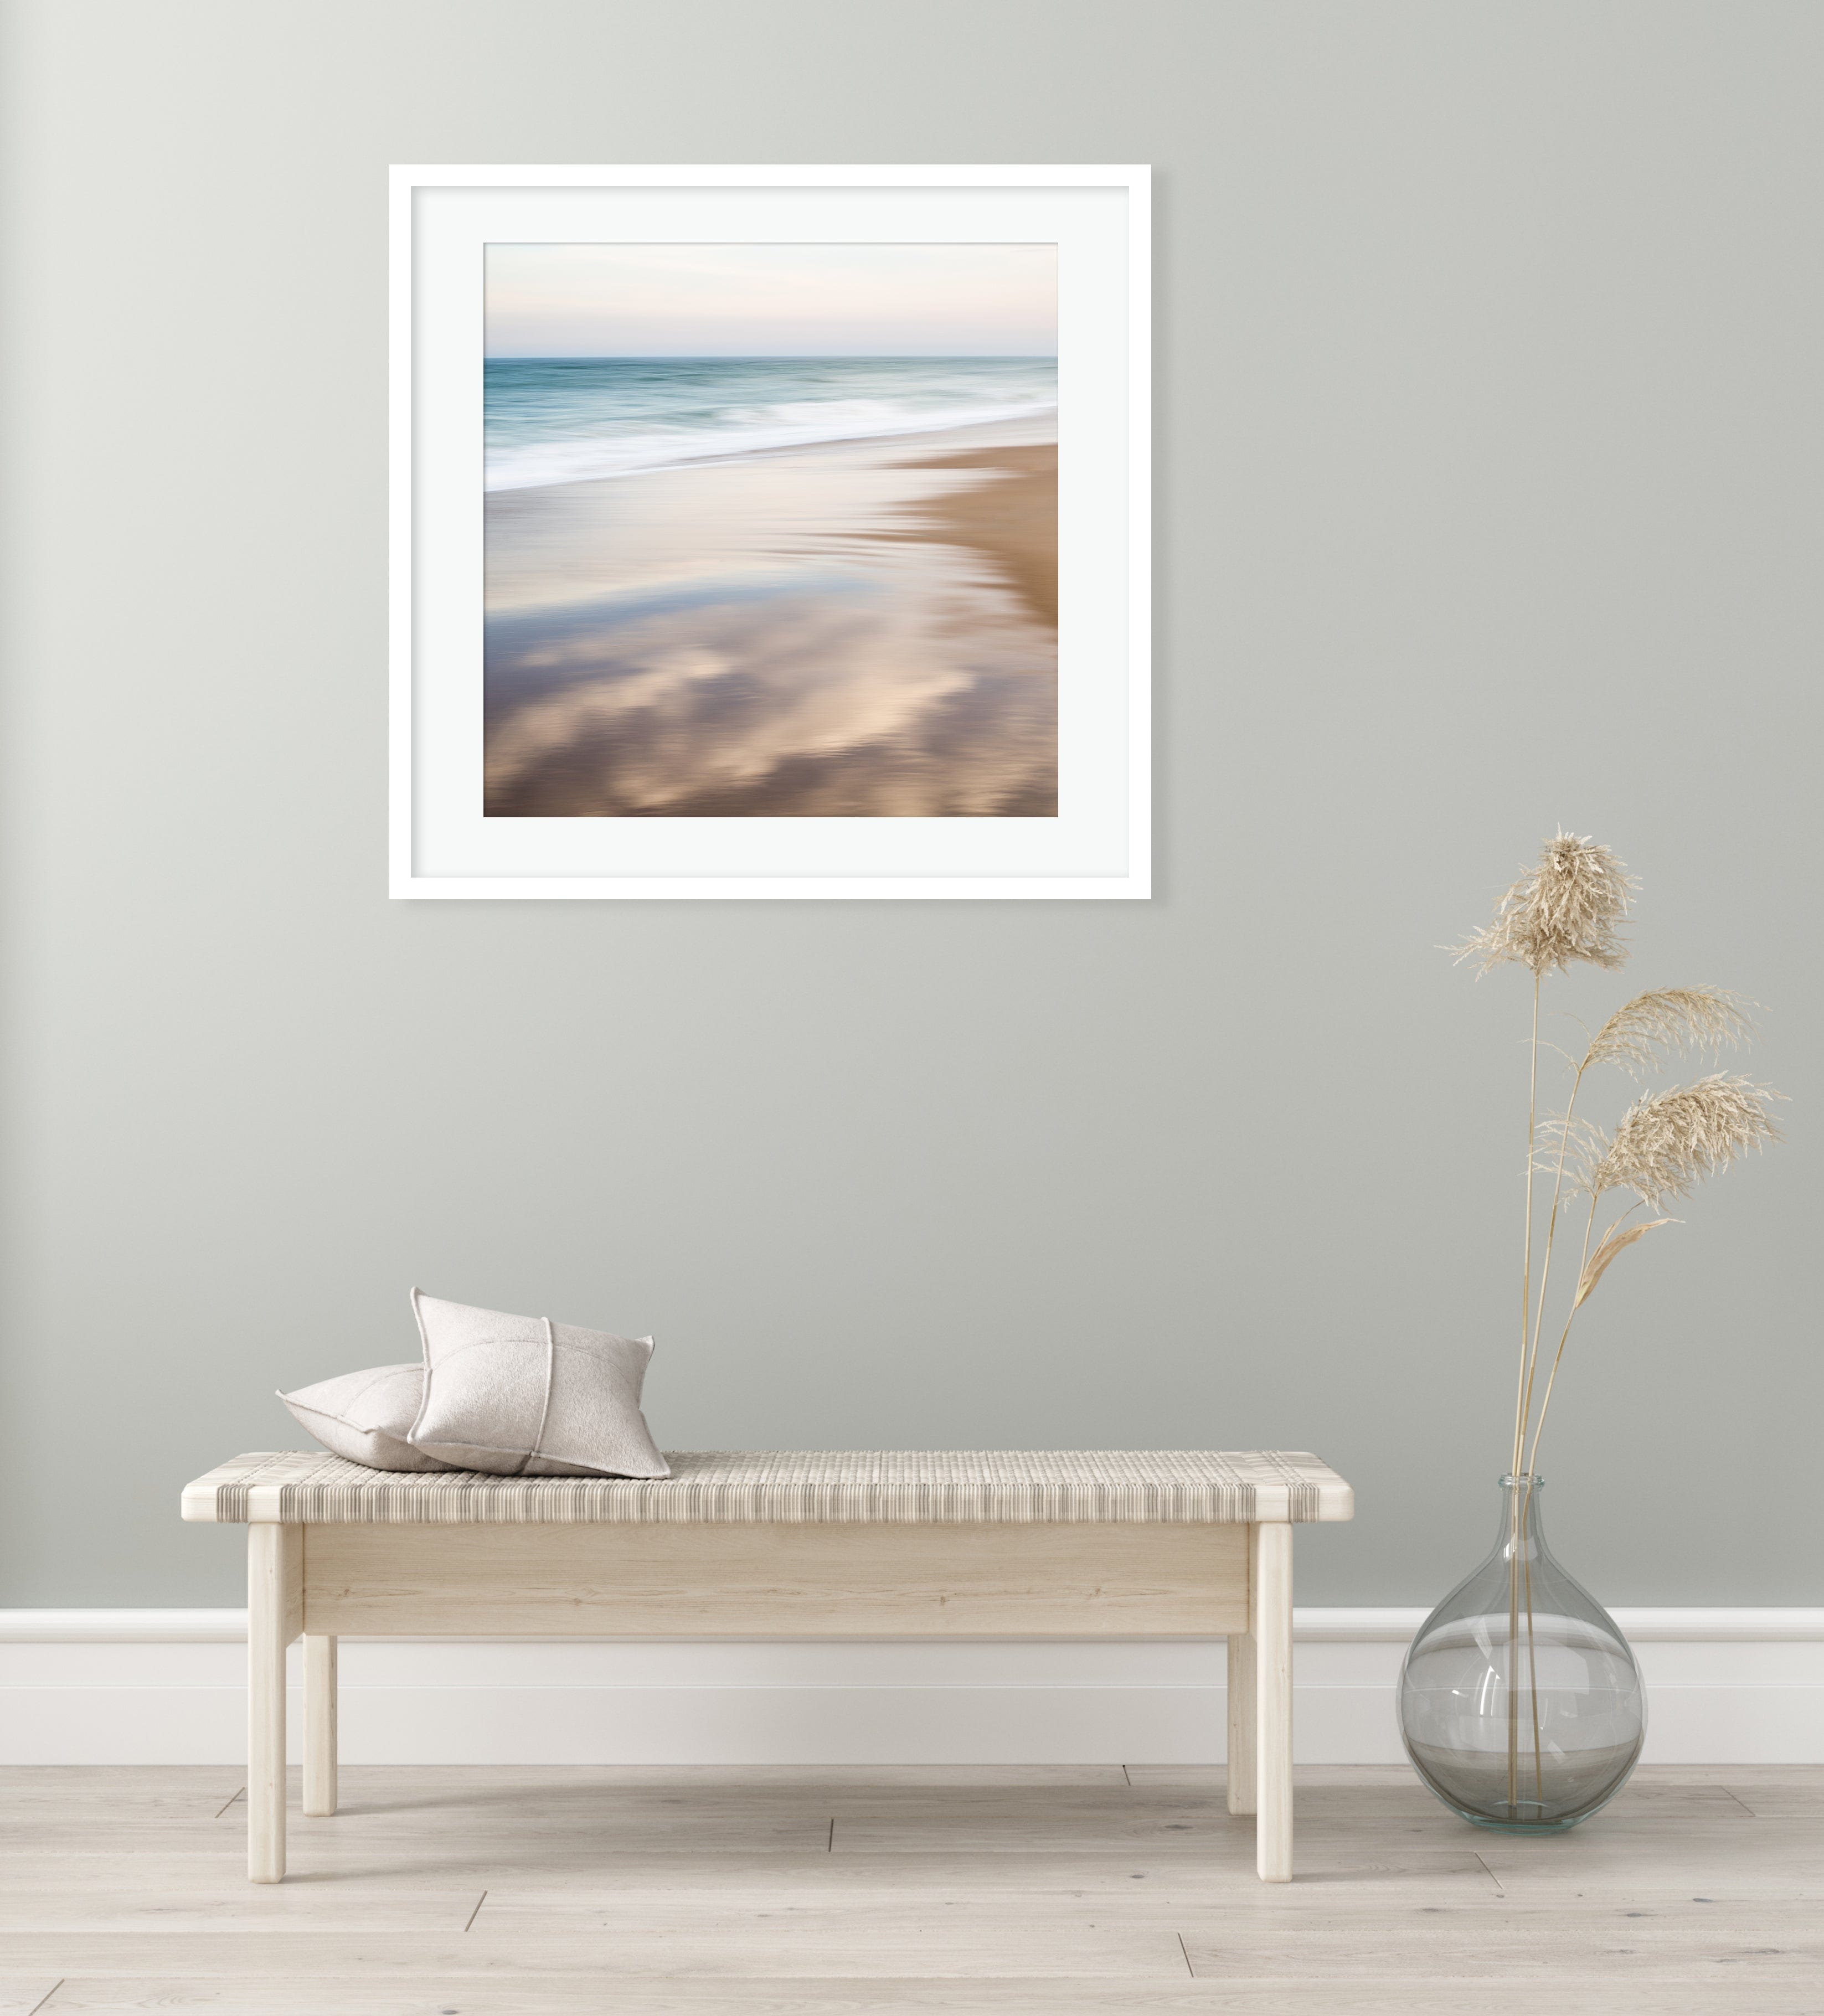 Cate Brown Photo Fine Art Print / 8"x8" / None (Print Only) East Beach #8  //  Abstract Photography Made to Order Ocean Fine Art